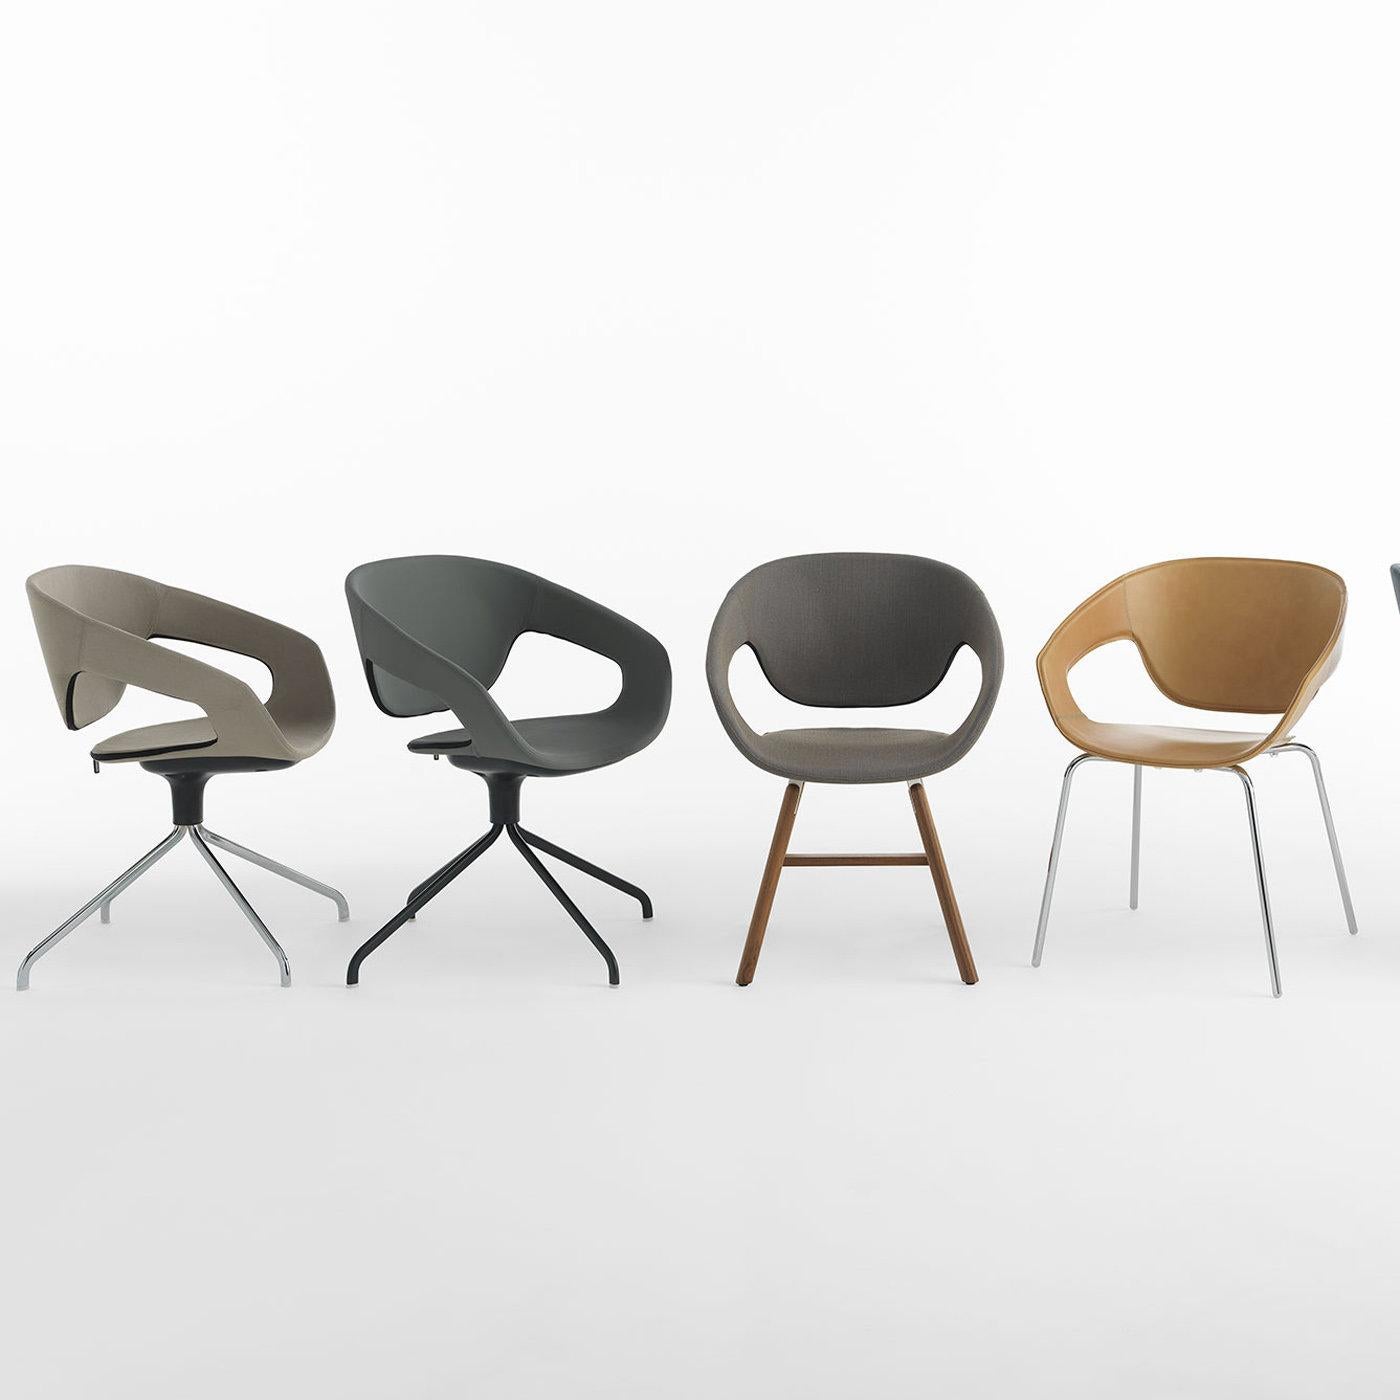 Sleek lines and curved edges are the defining features of this elegant chair of the Vad series designed by Luca Nichetto. The contoured silhouette and open backrest reflect the balanced simplicity of the Scandinavian style, which is the main